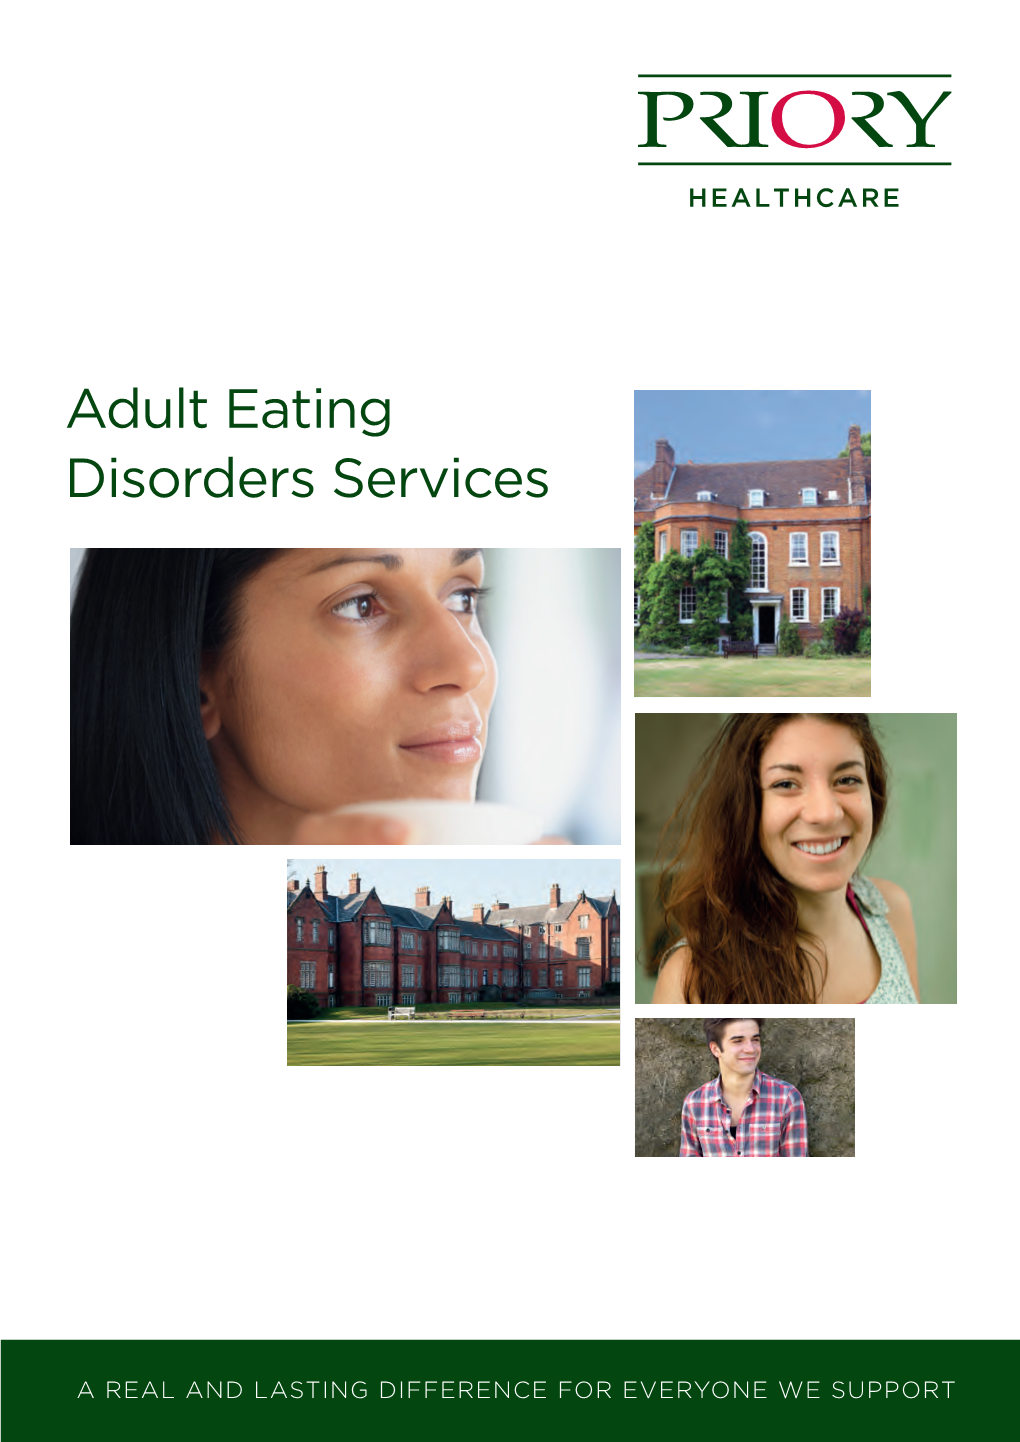 Adult Eating Disorders Services